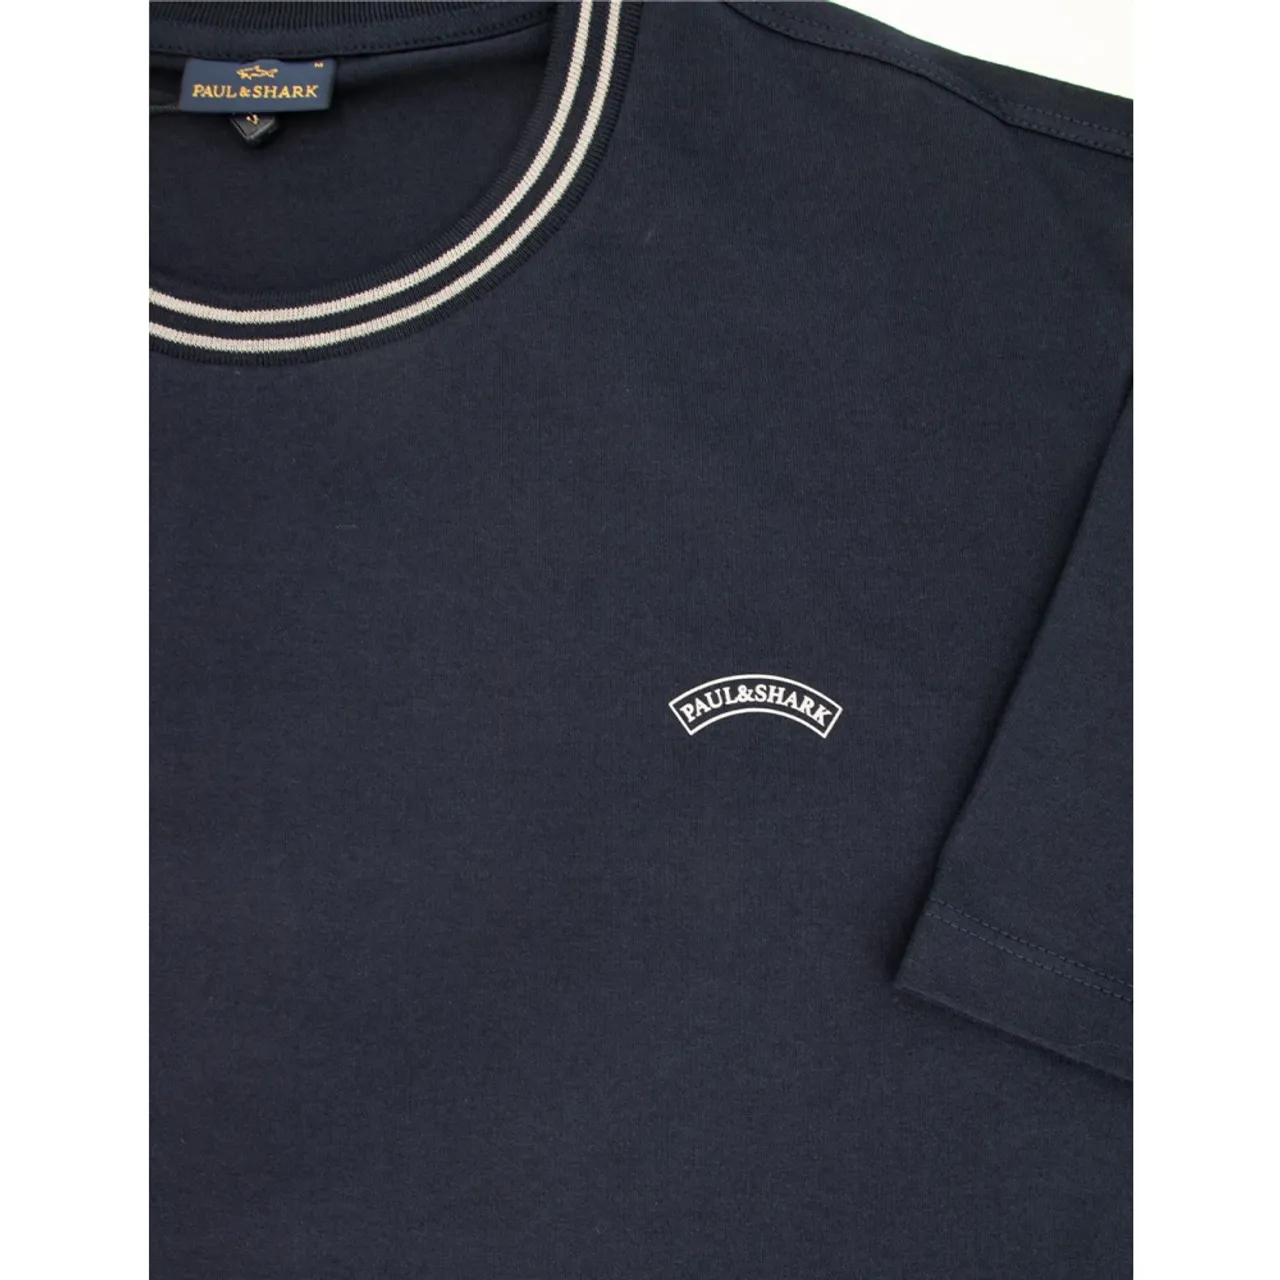 Paul & Shark , Cotton Crew-neck T-shirt with Contrasting Stripes ,Blue male, Sizes: